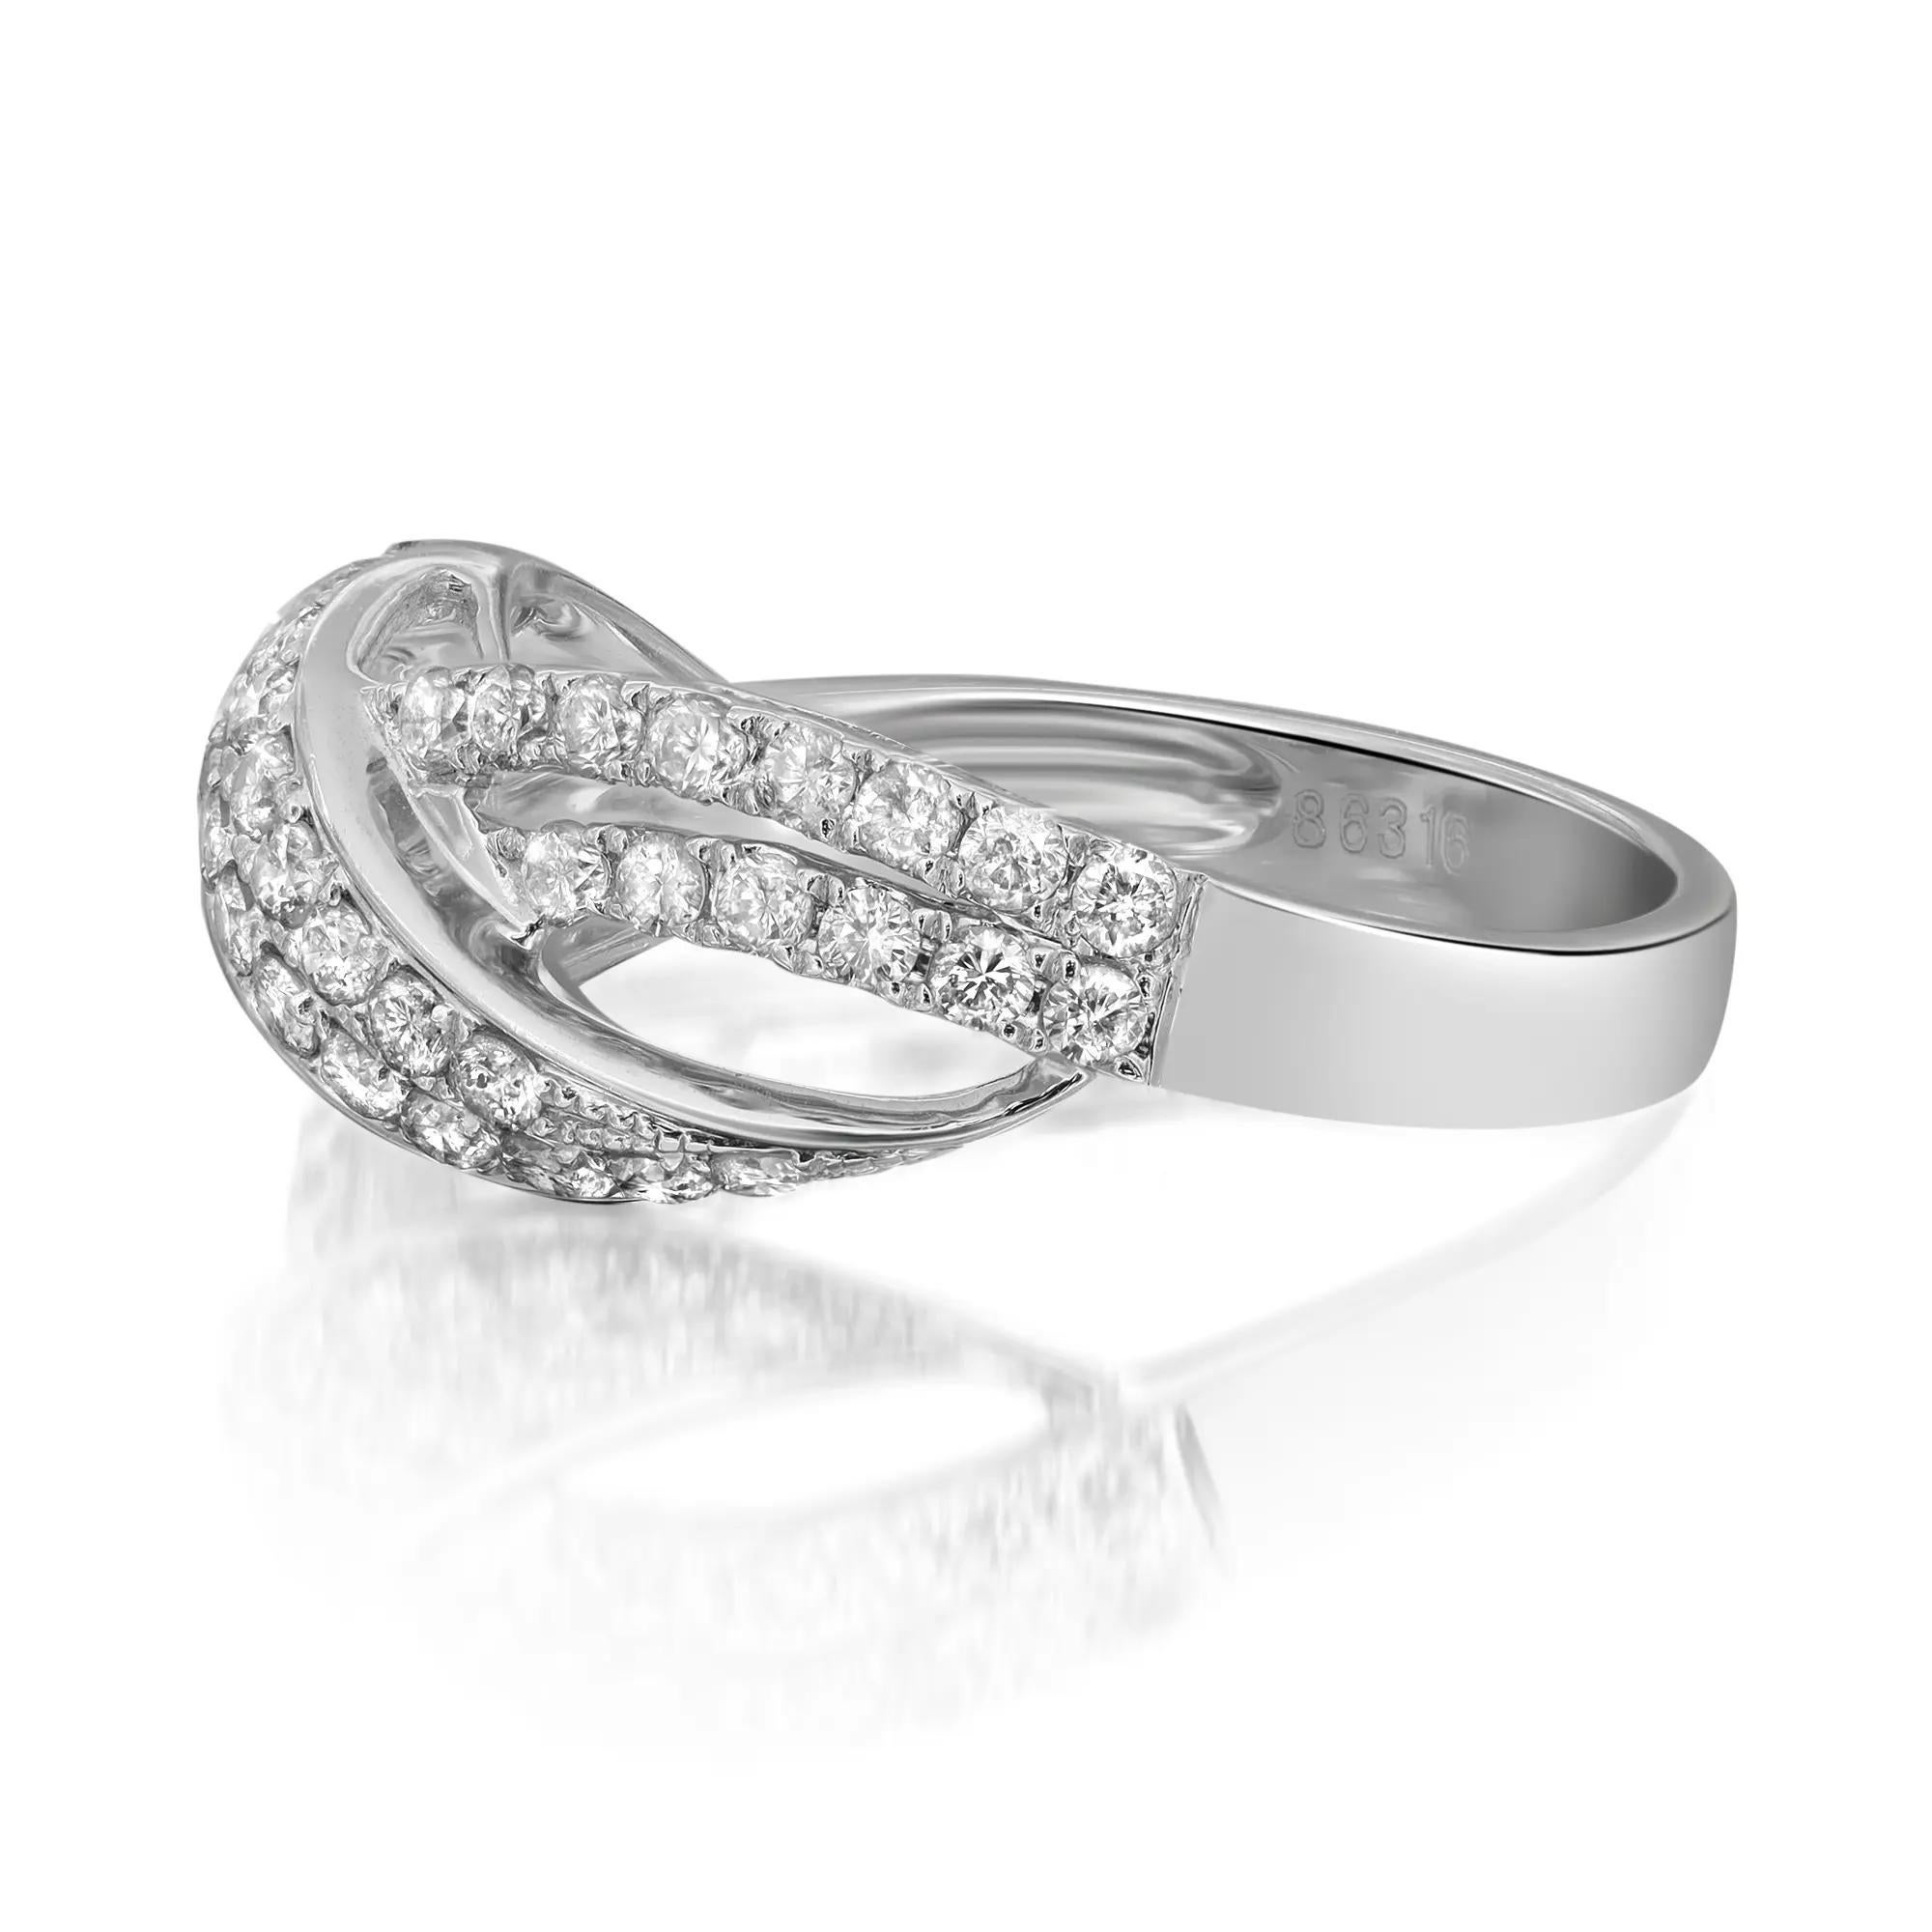 Classic and elegant diamond band ring rendered in highly polished 14K white gold. This ring features sparkling round brilliant cut diamonds in prong settings totaling 0.88 carat. Diamond quality: I color and SI1 clarity. Ring size: 7.75. Ring width: